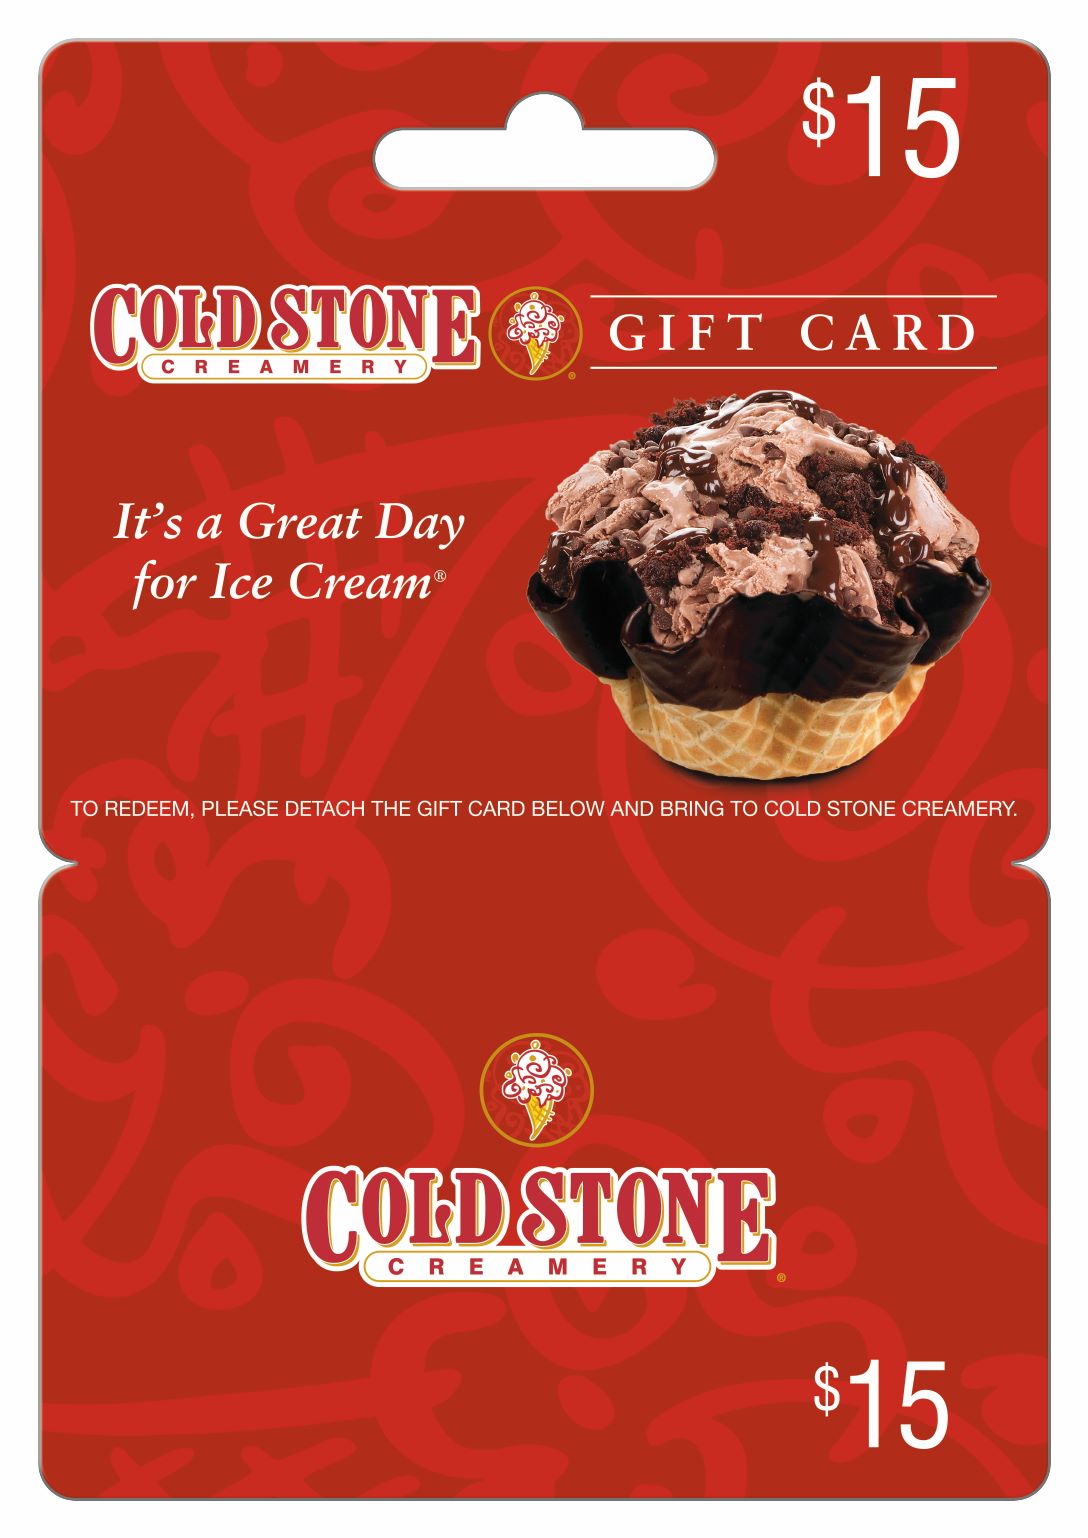 Coldstone Creamery $15 Gift Card - image 1 of 4